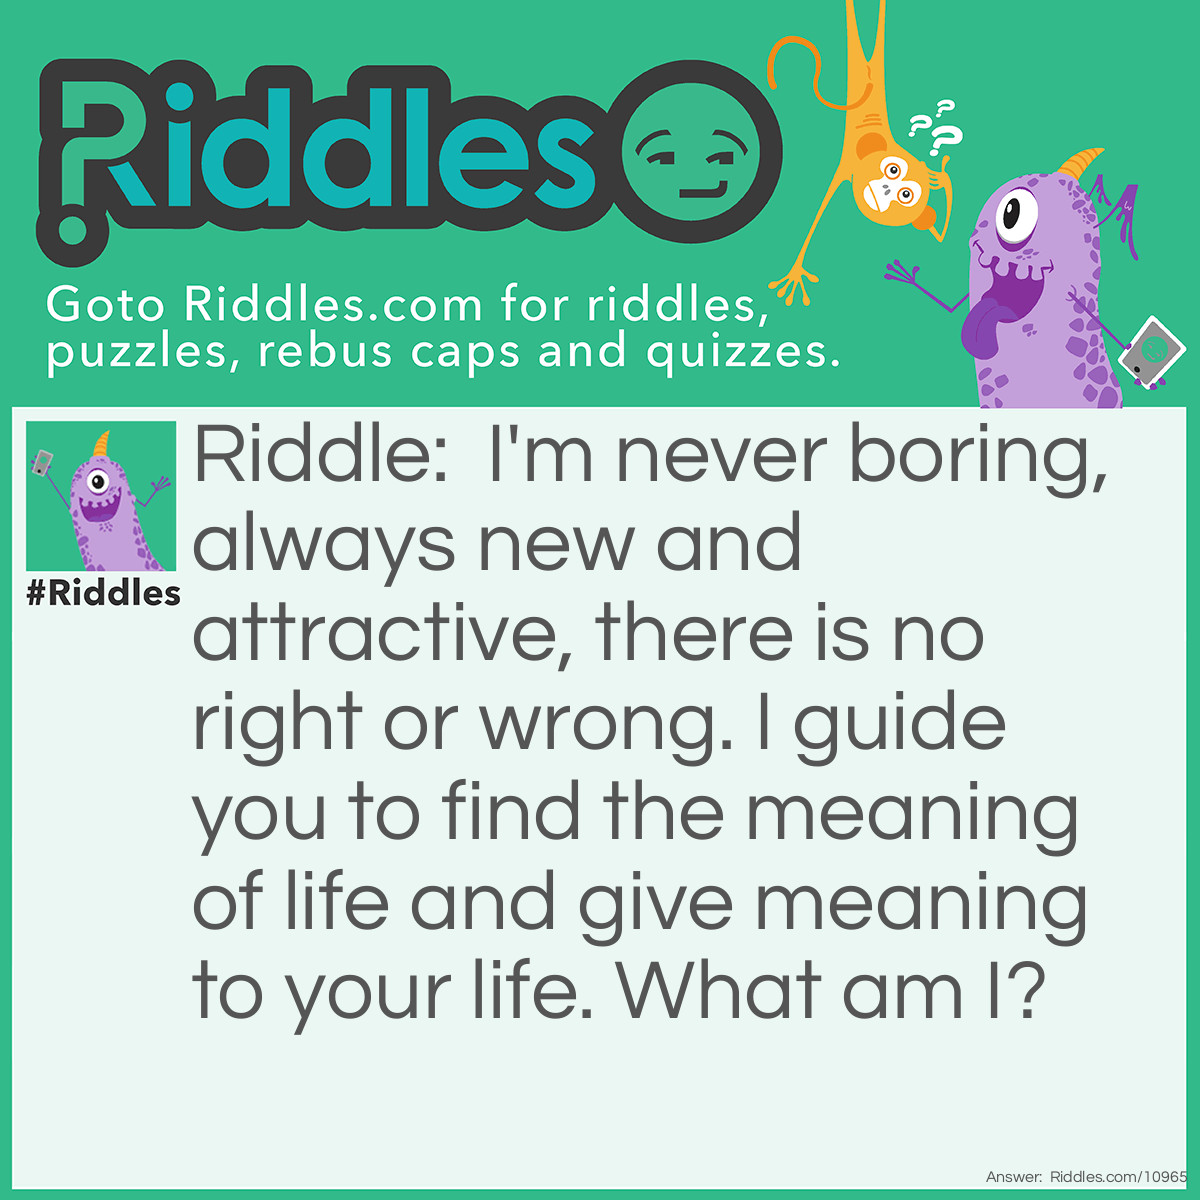 Riddle: I'm never boring, always new and attractive, there is no right or wrong. I guide you to find the meaning of life and give meaning to your life. What am I? Answer: Knowledge.